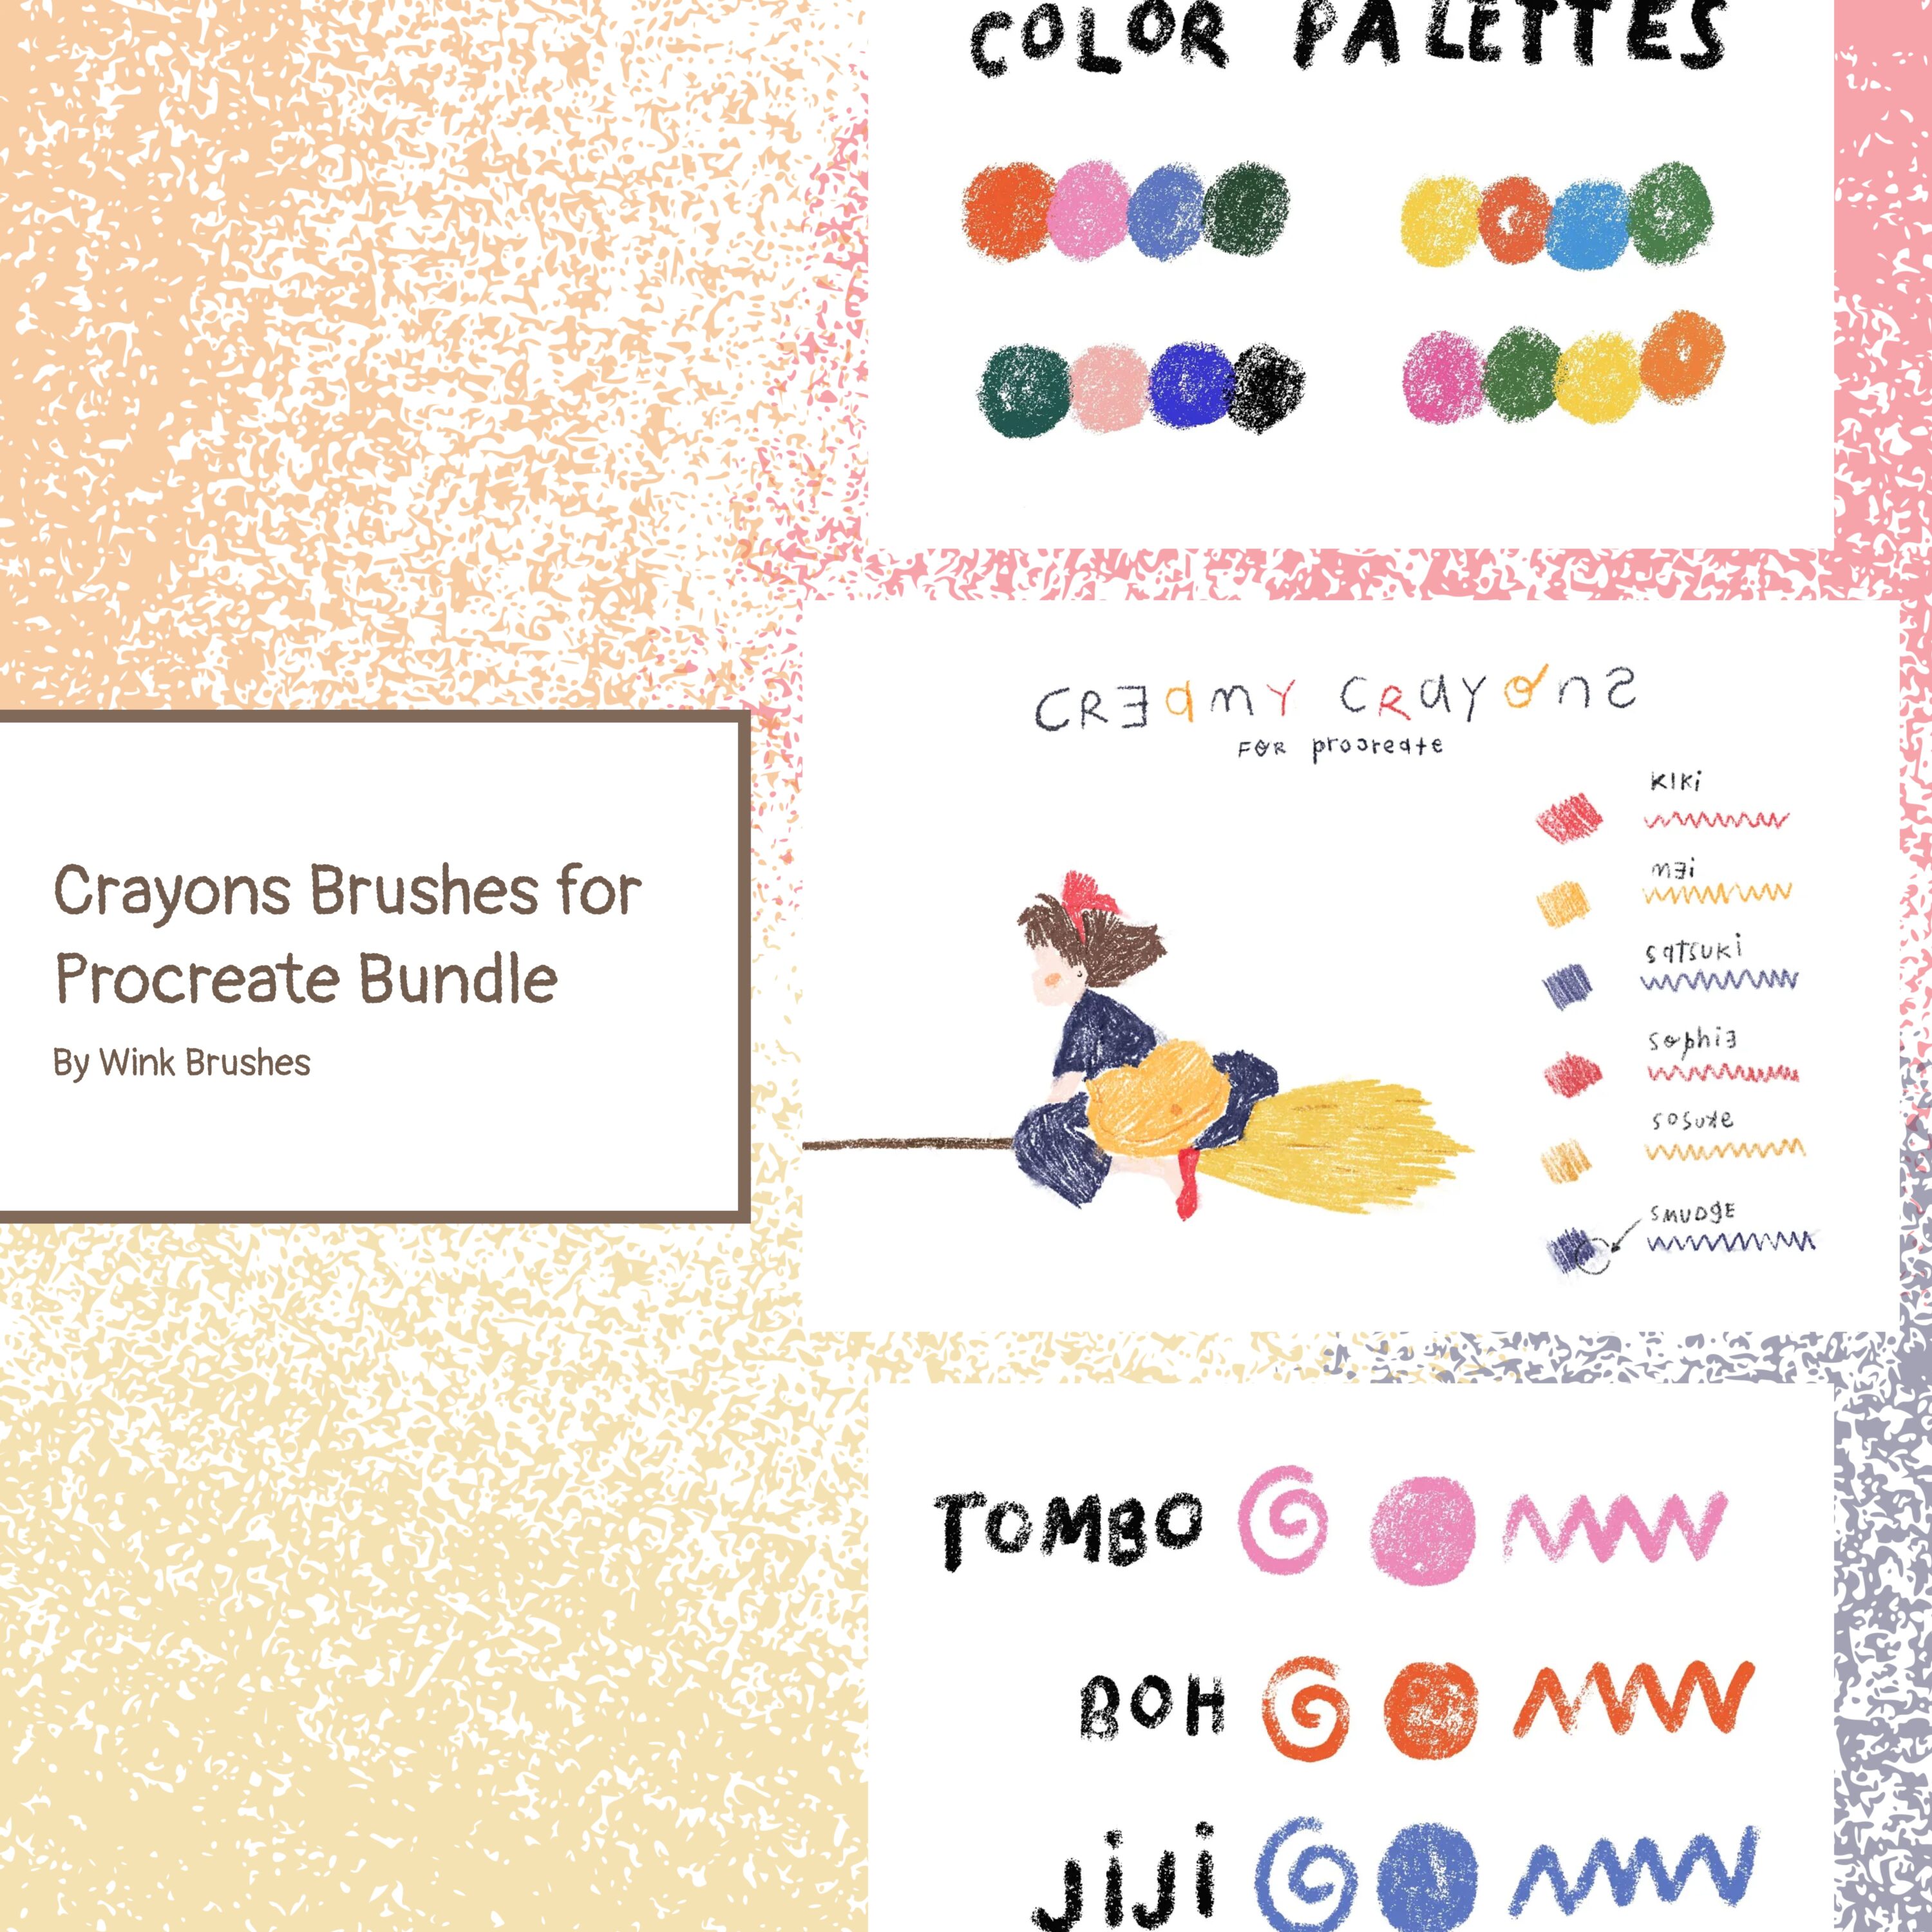 Crayons Brushes for Procreate Bundle cover image.